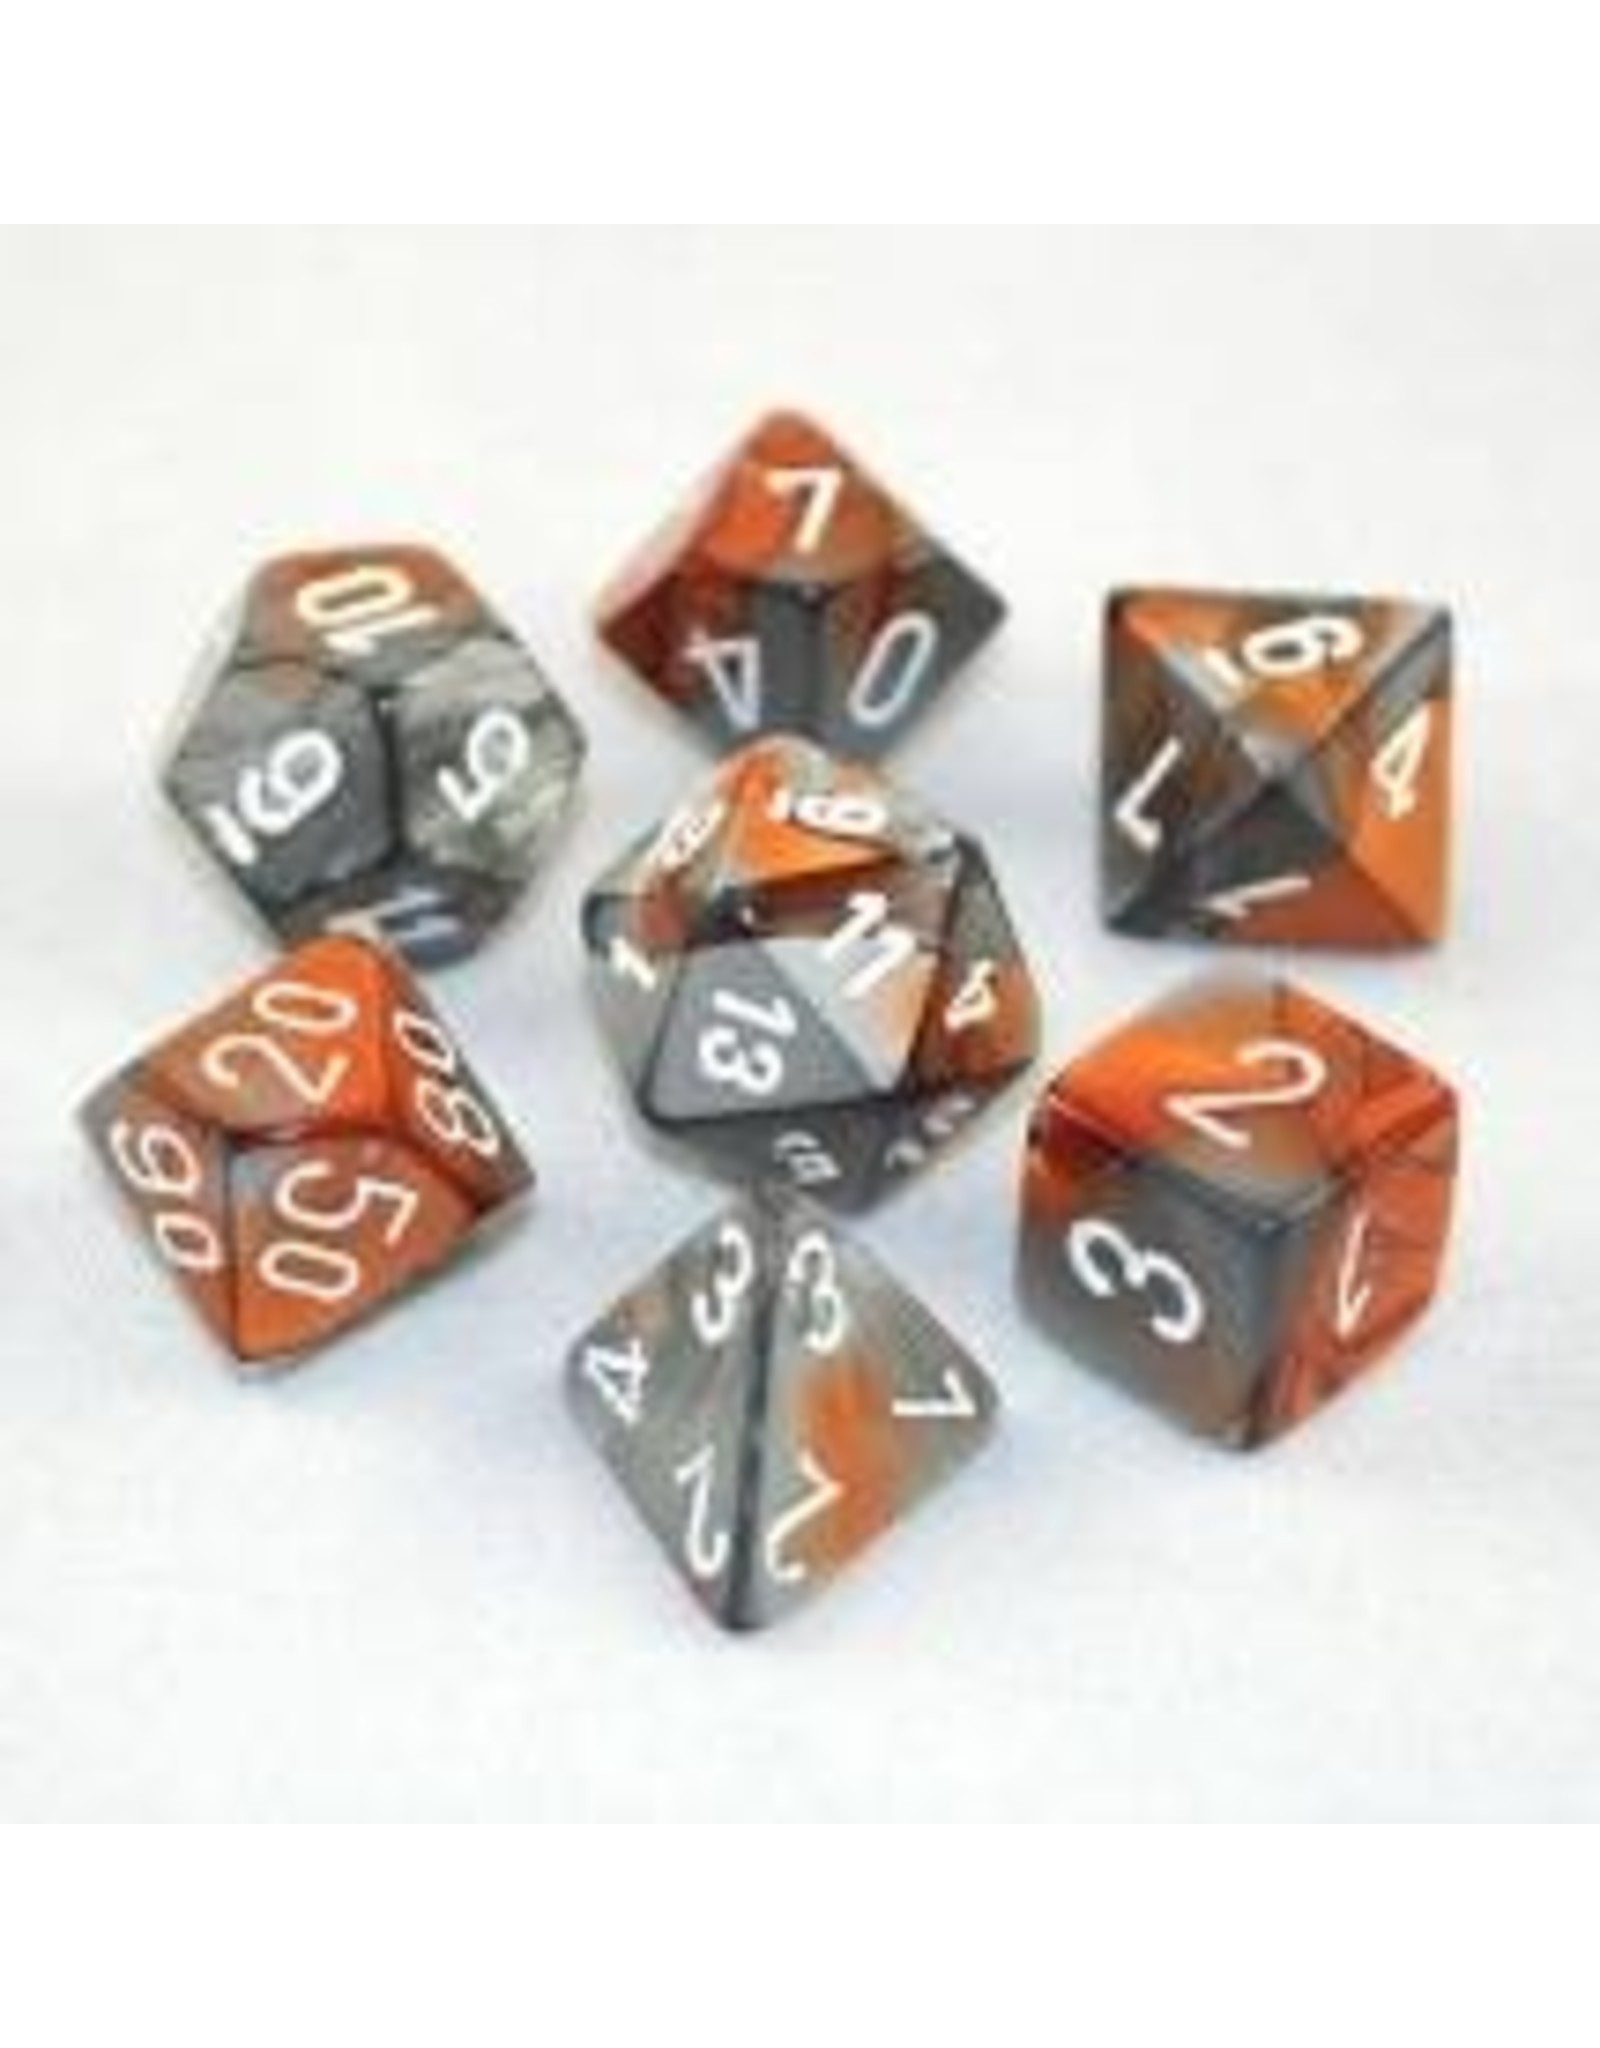 Chessex 7-Set Cube Gemini Copper and Steel with White